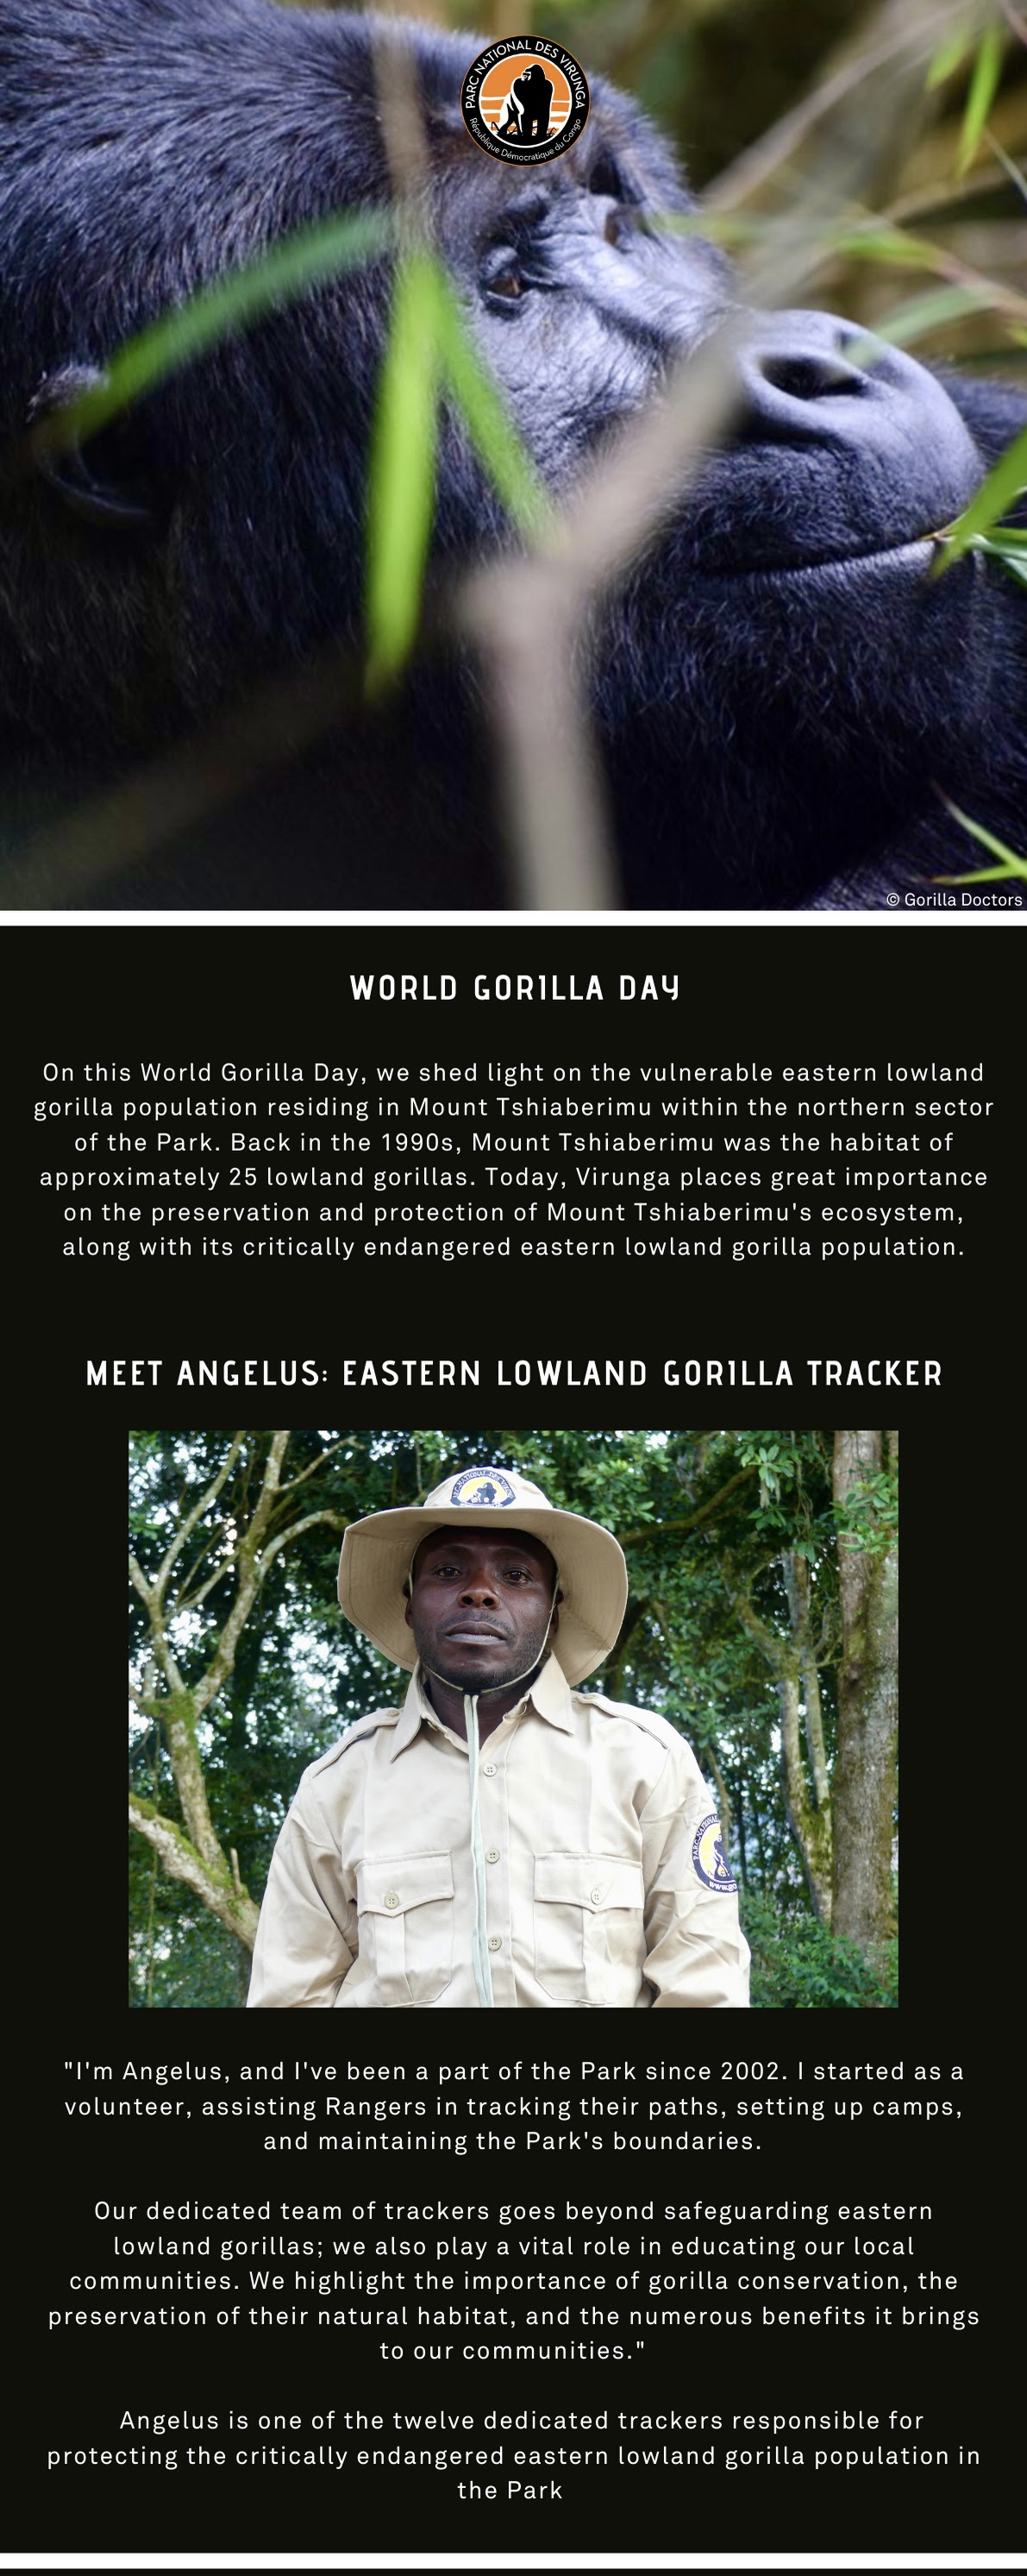 On this World Gorilla Day, we shed light on the vulnerable eastern lowland gorilla population residing in Mount Tshiaberimu within the northern sector of the Park.